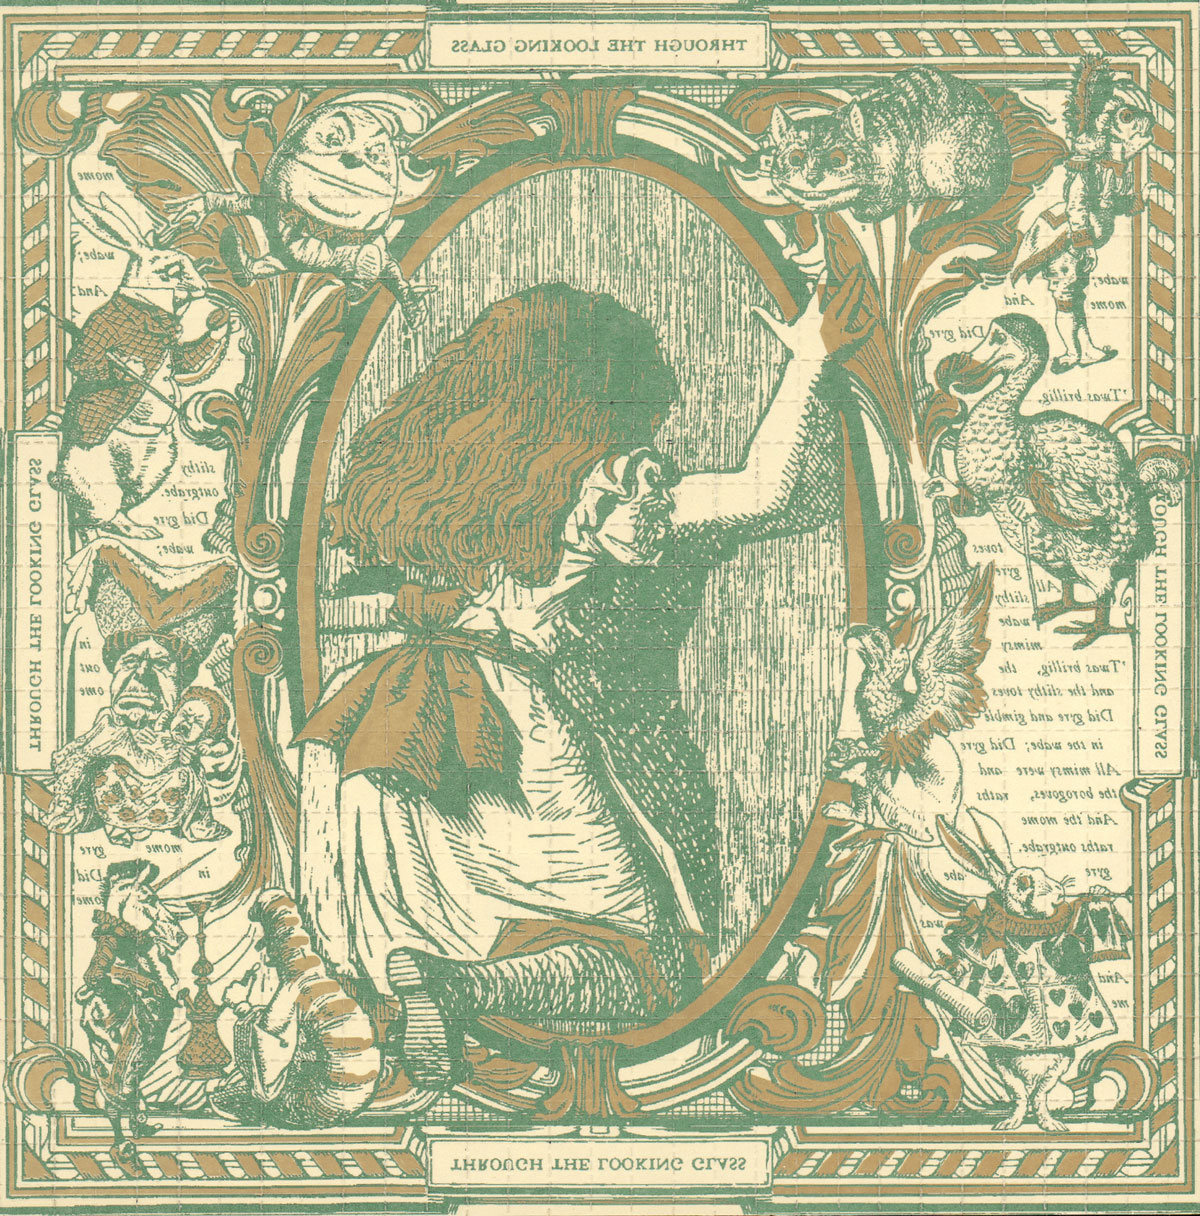 The back of a sheet of blotter acid paper featuring a design including characters and text from Lewis Carroll's 